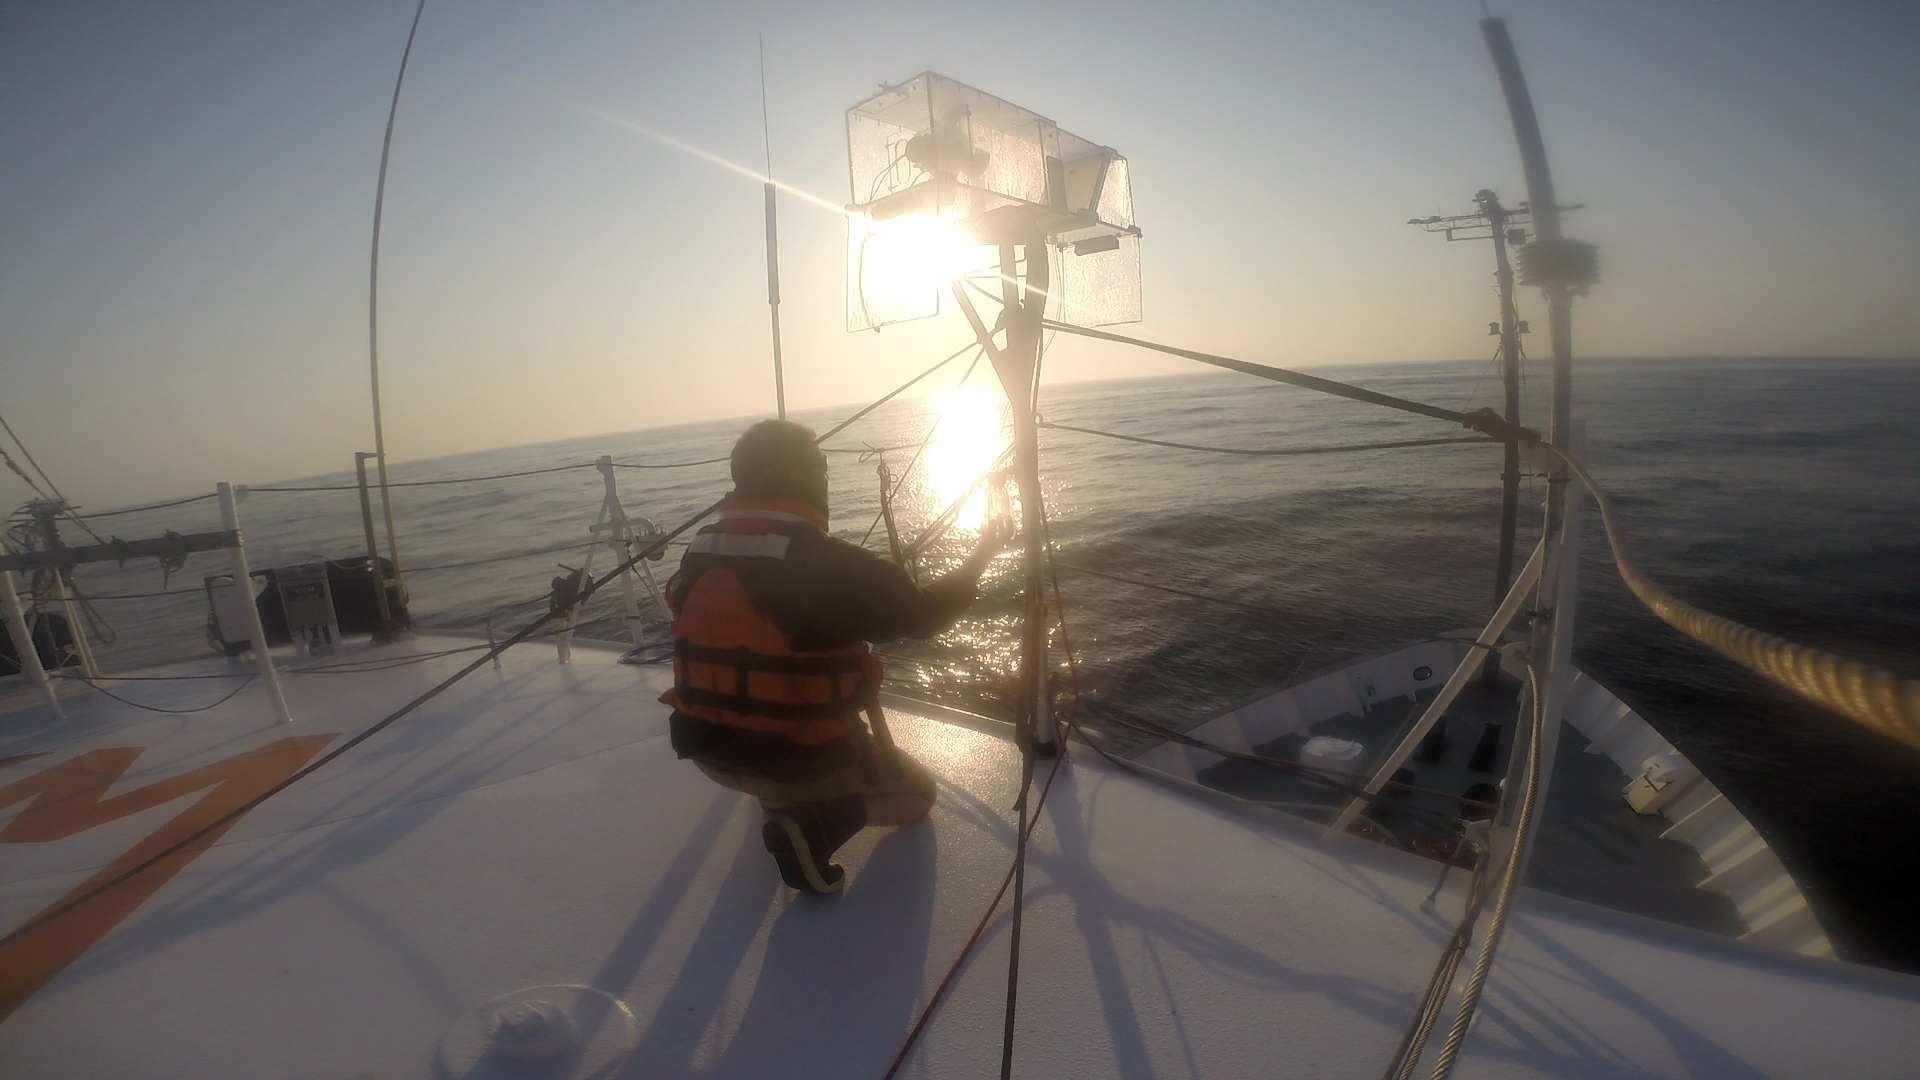 Collecting fog samples shortly after escaping an offshore fog bank.